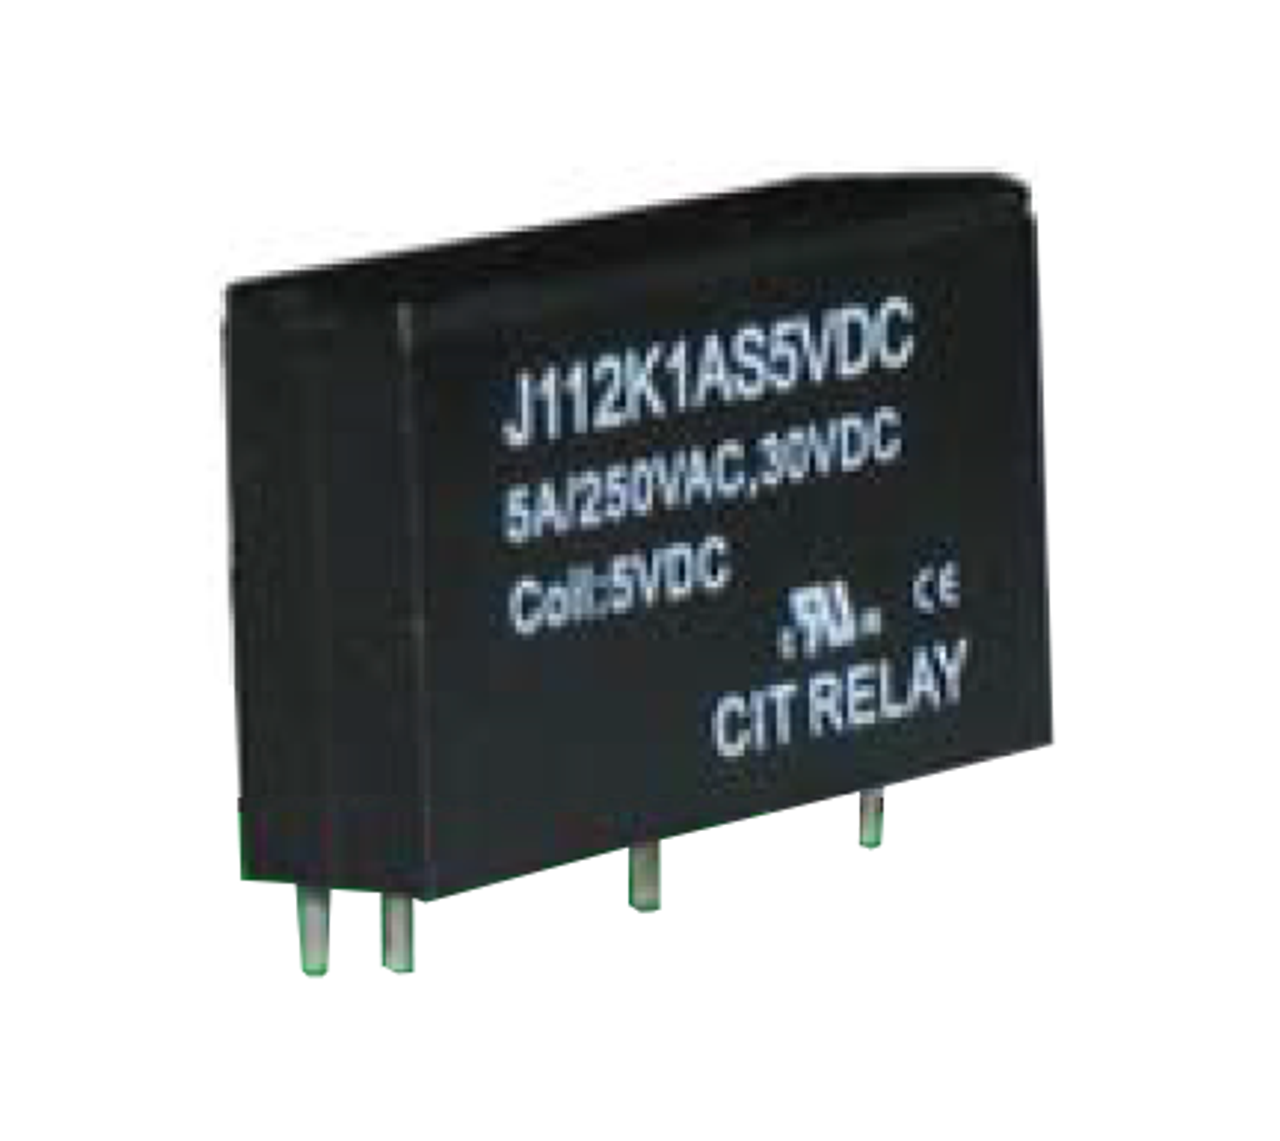 CIT Relay and Switch J1121AS18VDC General Purpose Relays